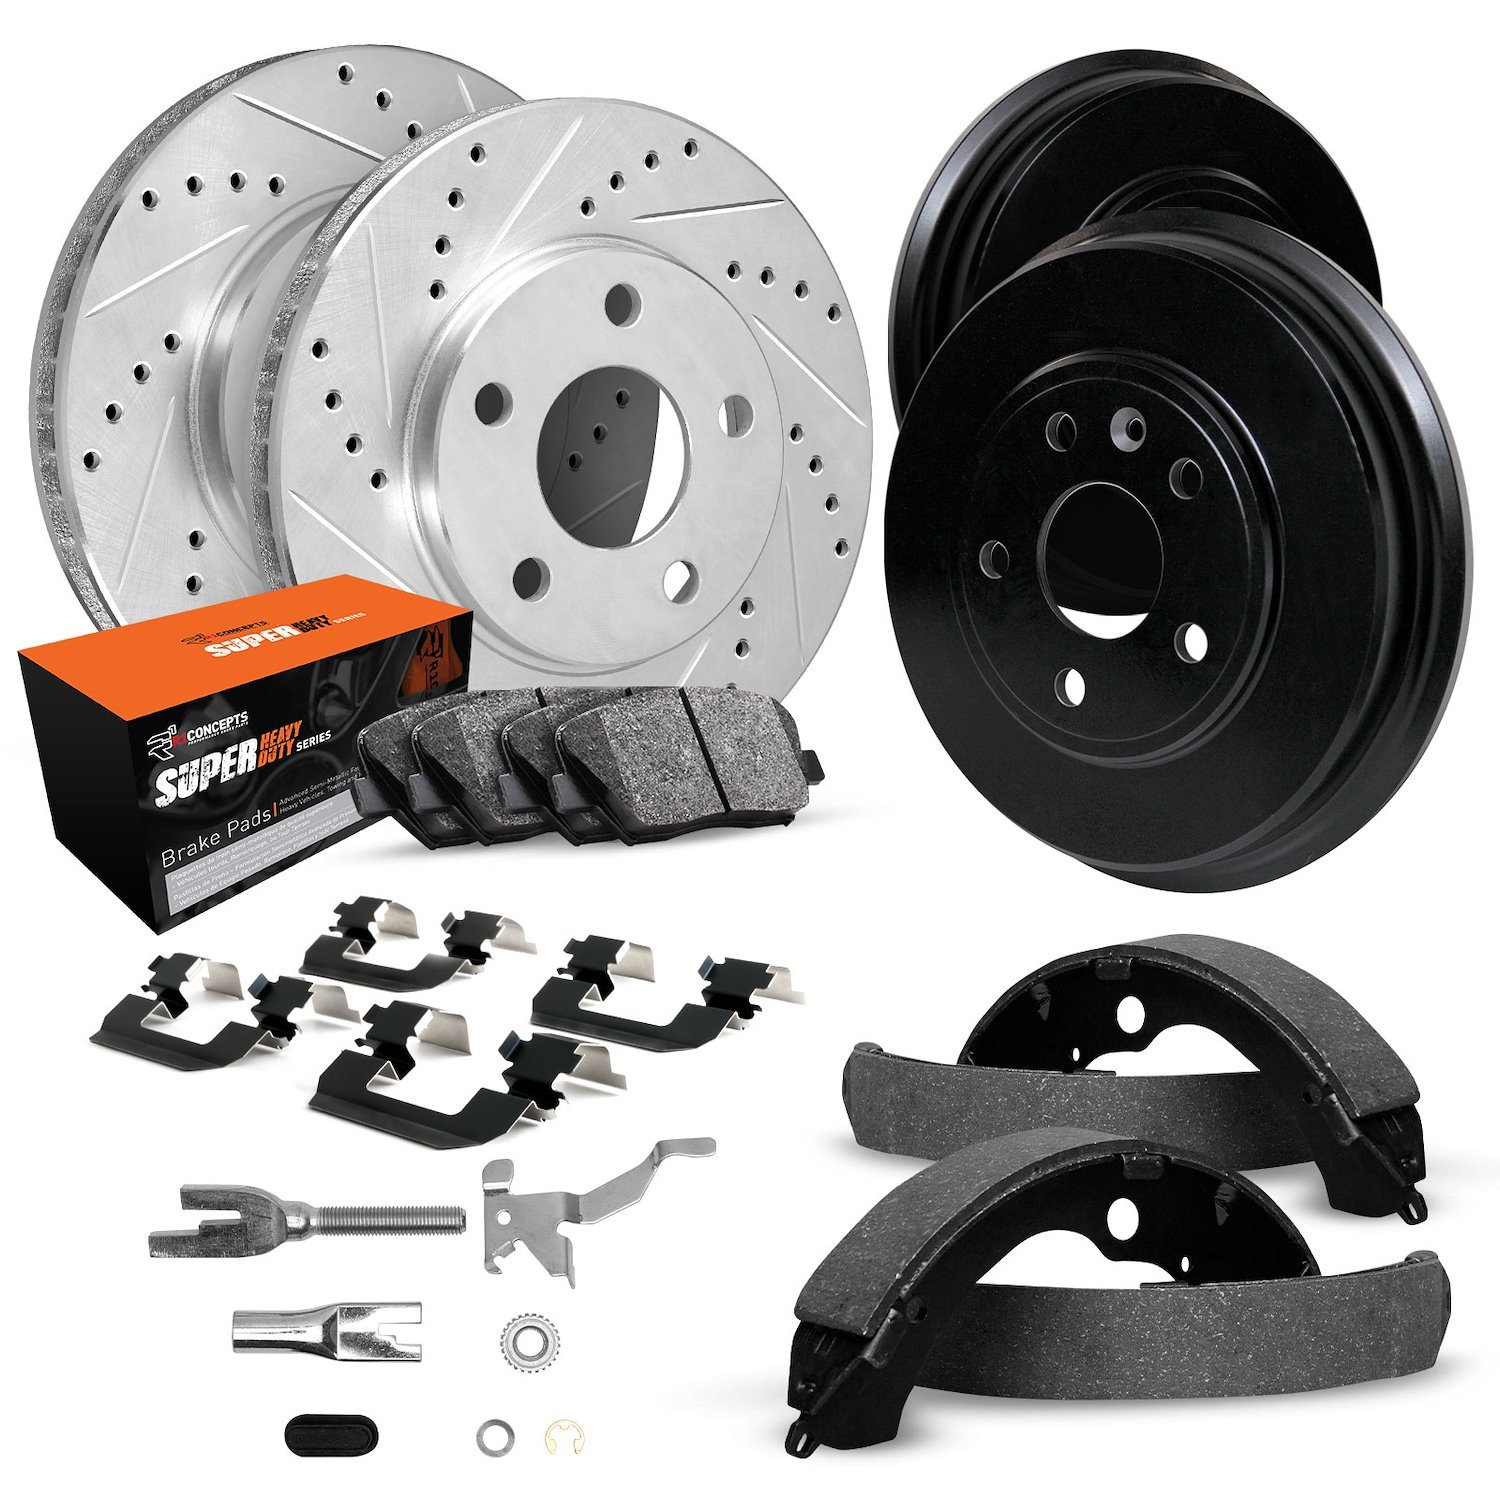 E-Line Drilled/Slotted Silver Rotor & Drum Set w/Super-Duty Pads, Shoes/Hardware/Adjusters, 1997-2002 Ford/Lincoln/Mercury/Mazda